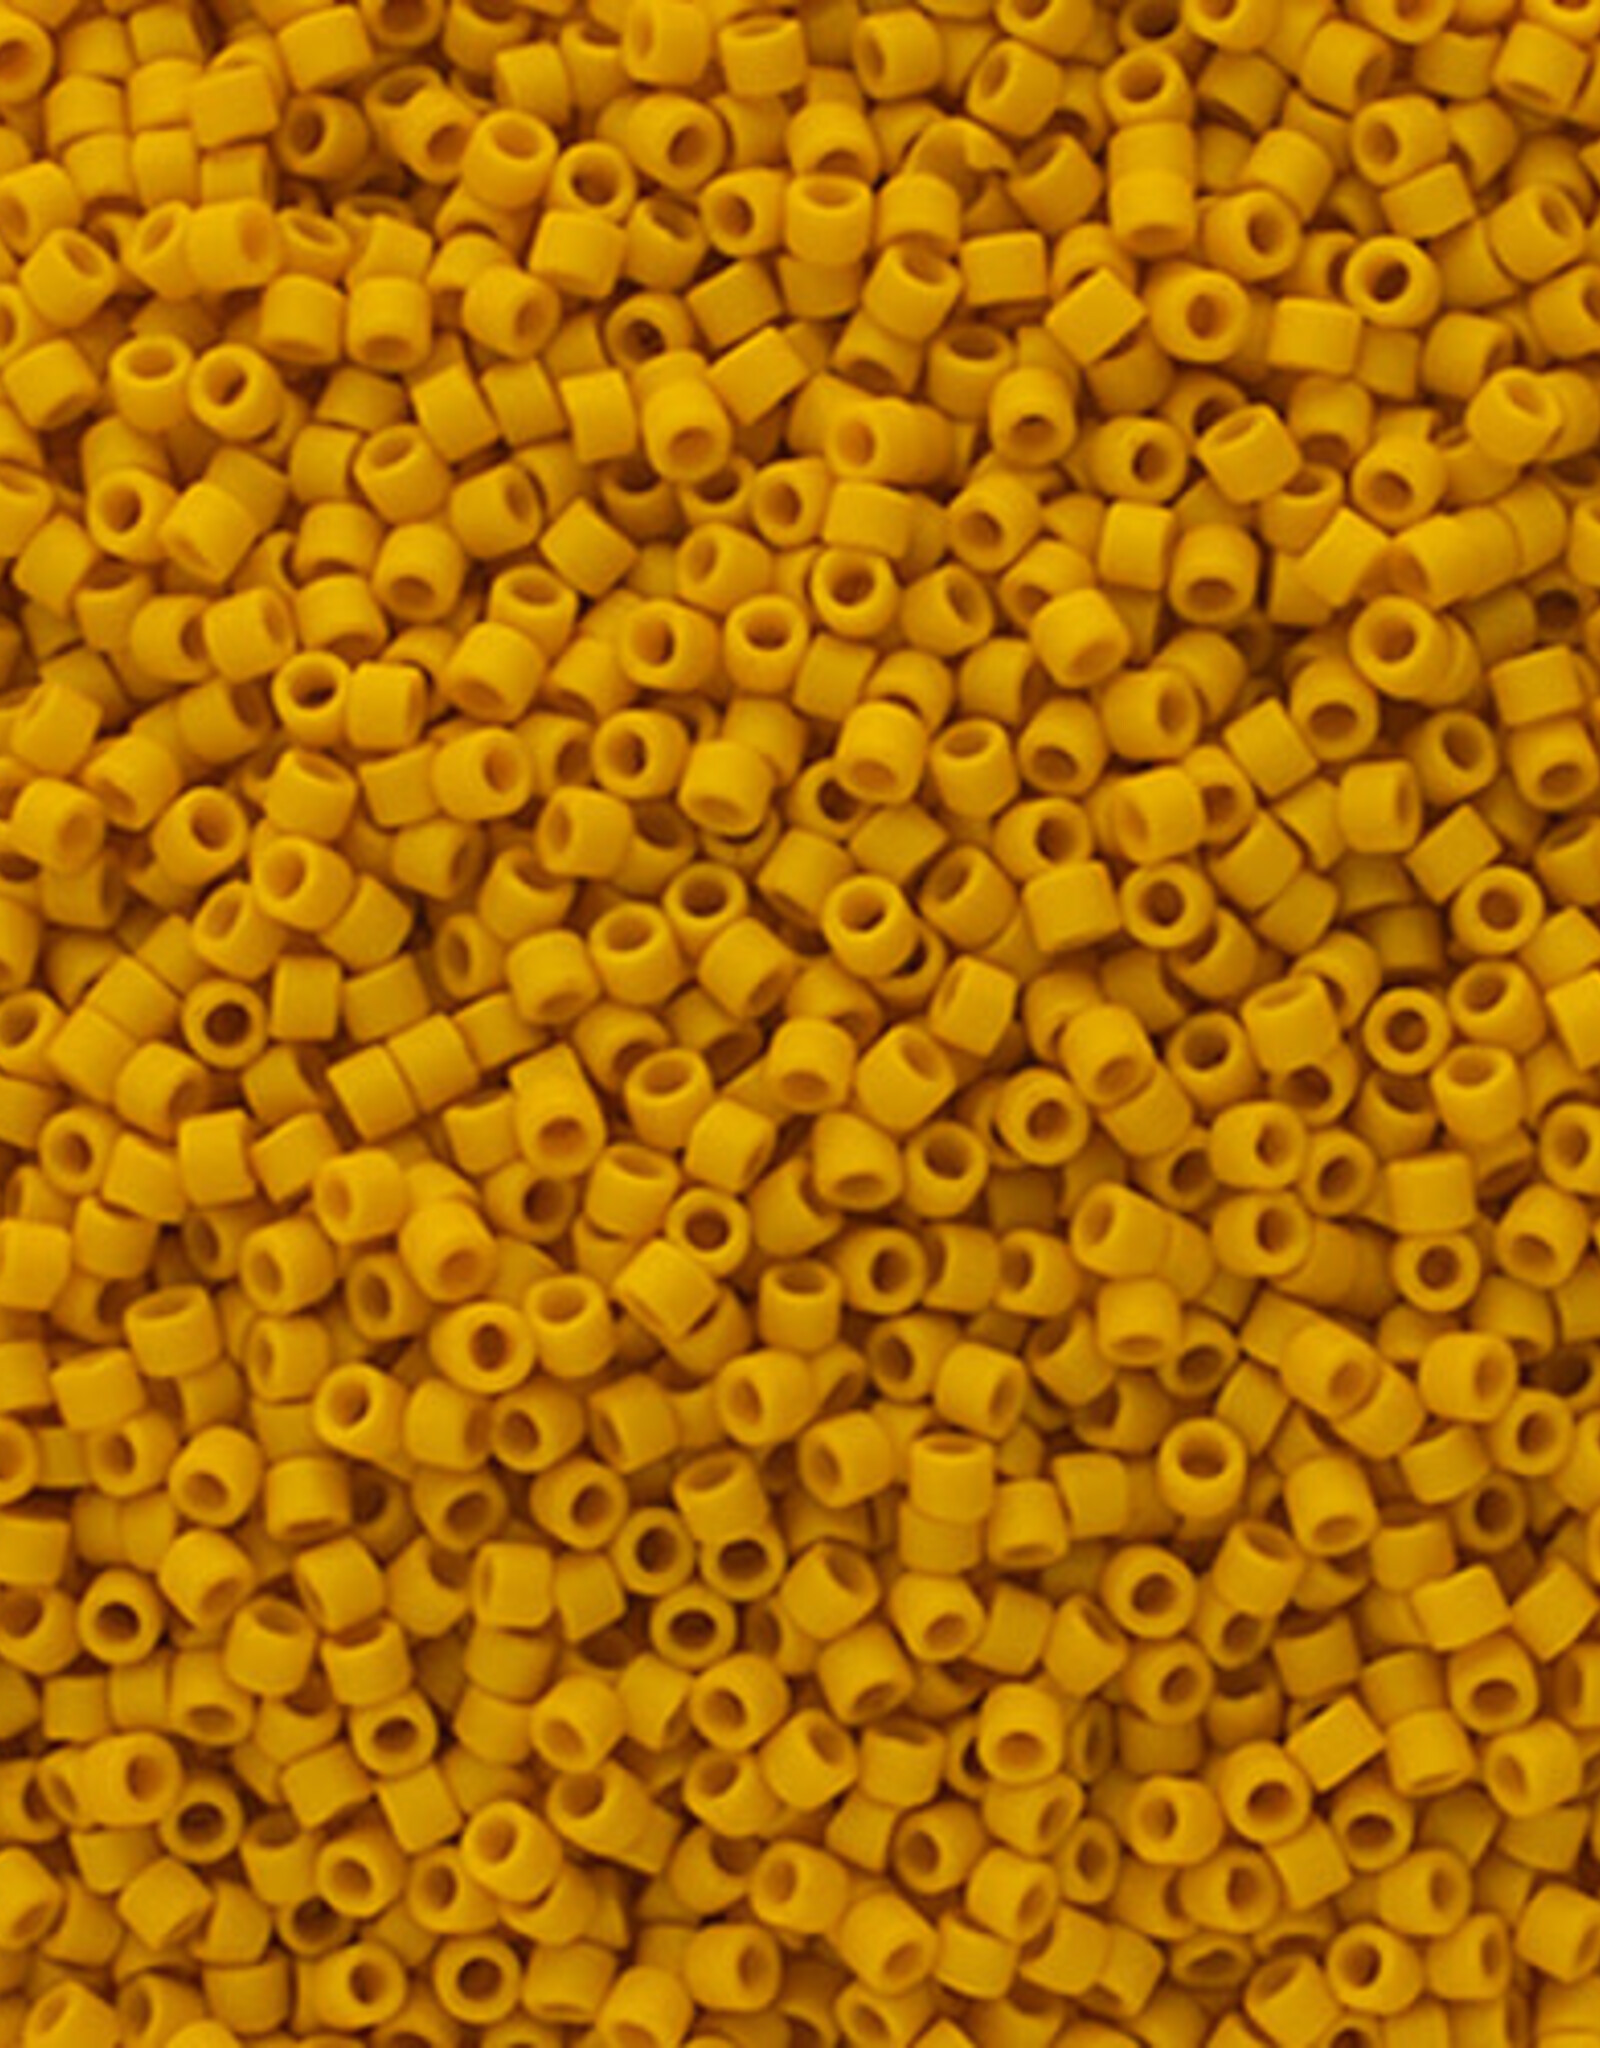 Miyuki Delica Seed Beads Delica 11/0 Frosted Glazed Yellow Canary Matte 2284V